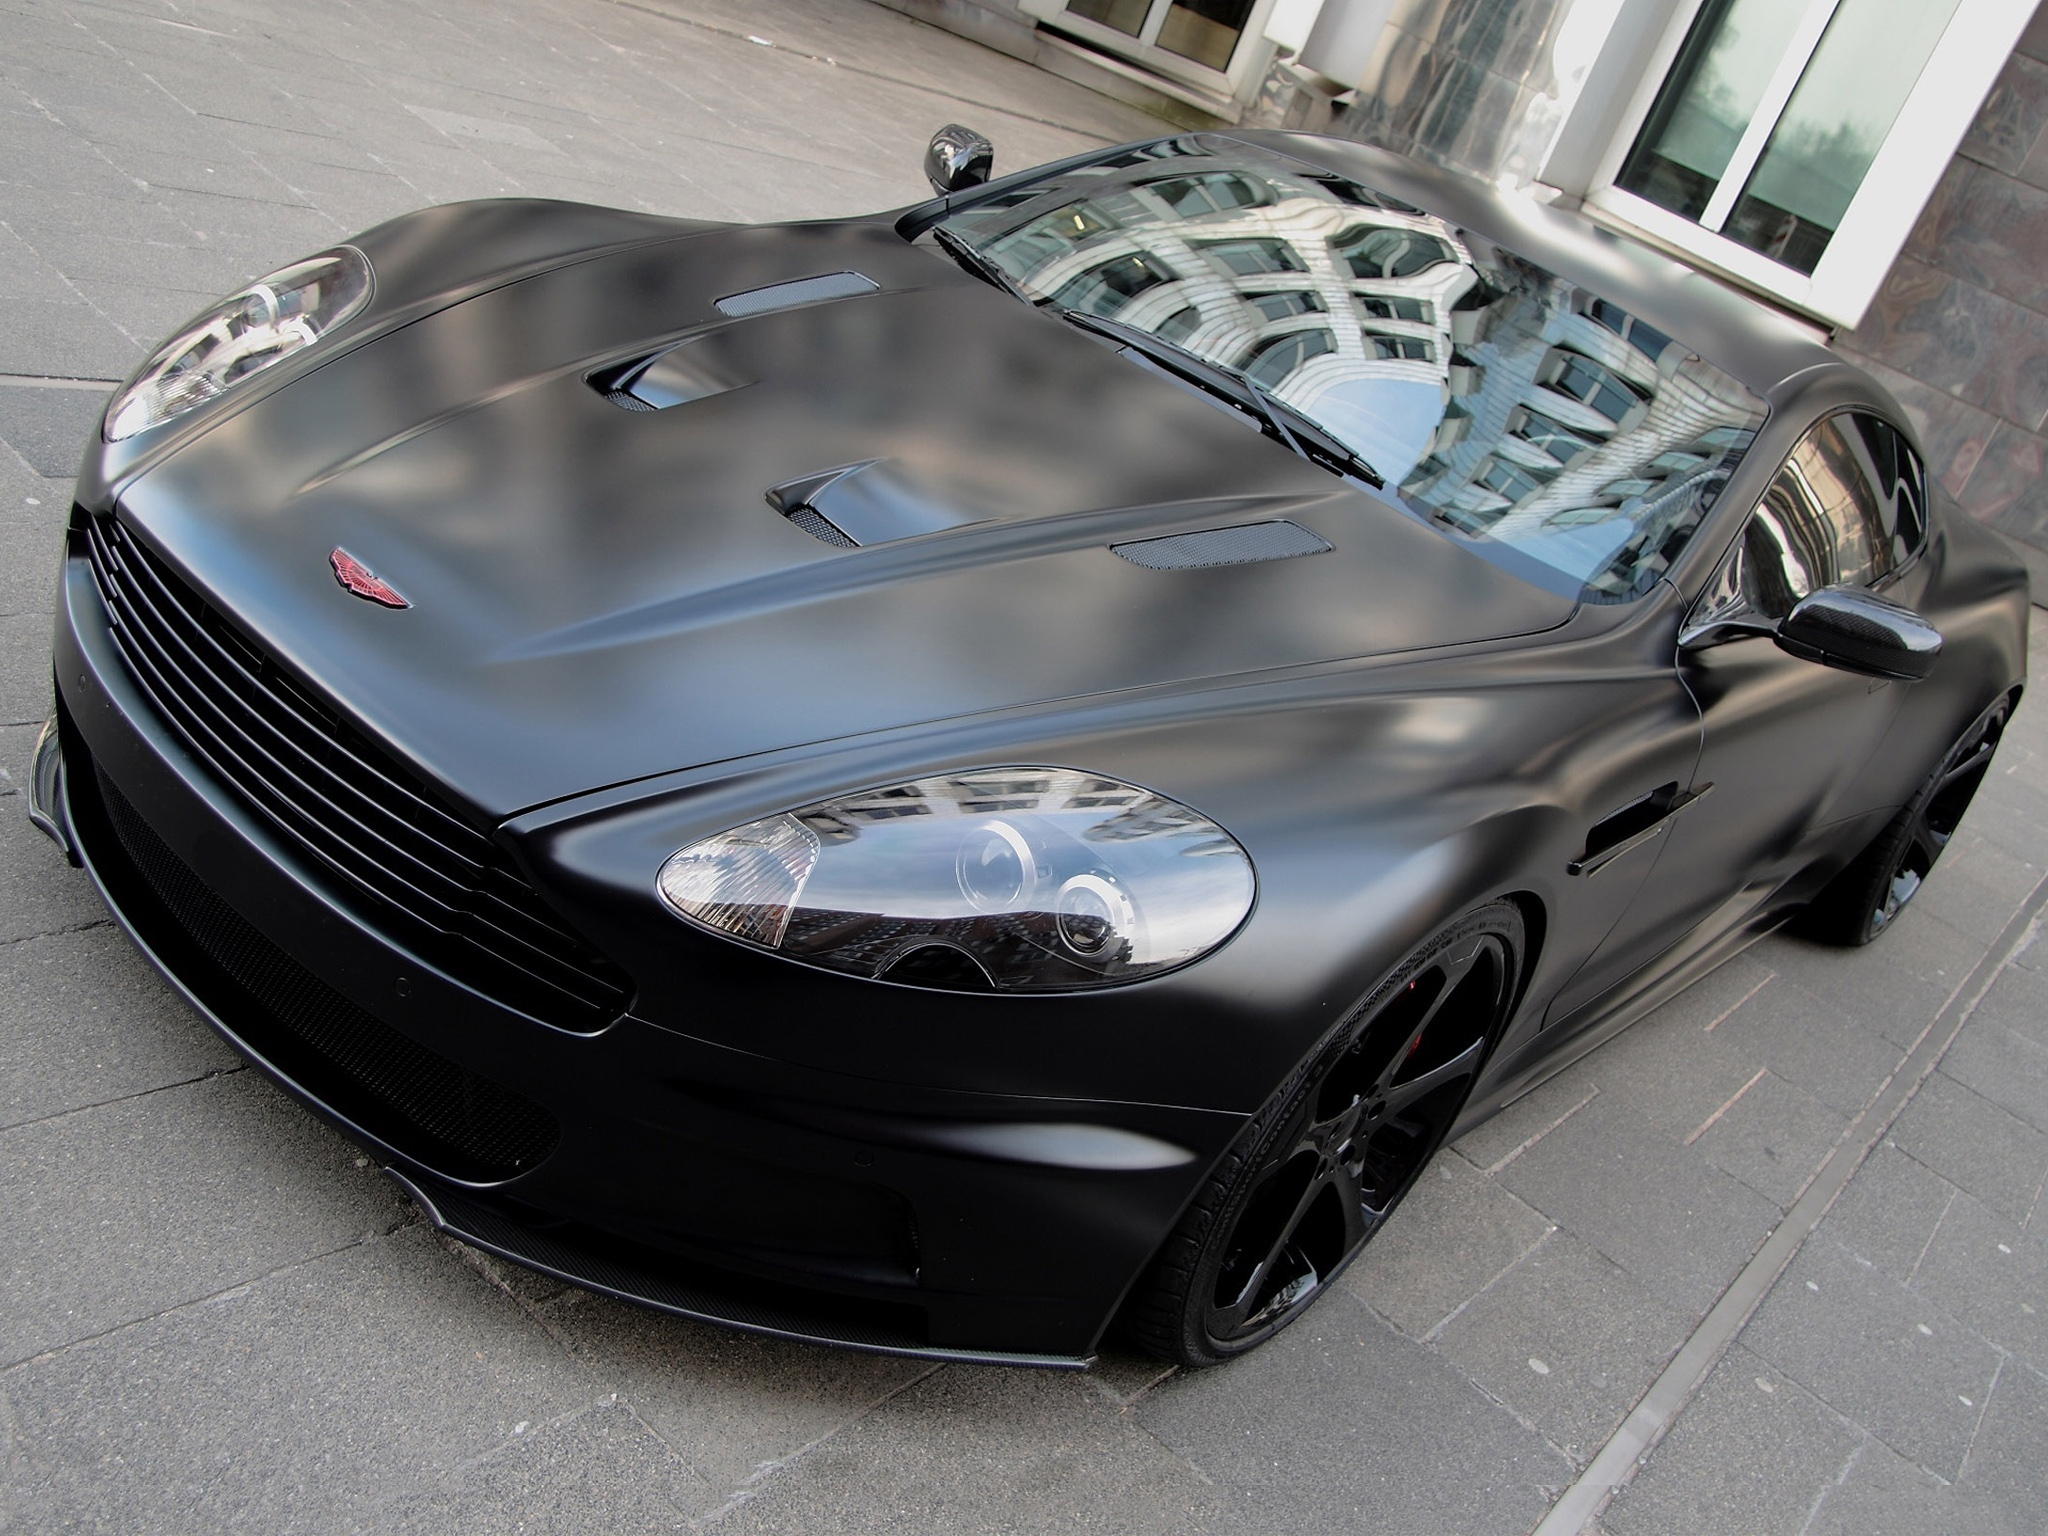 aston martin, cars, black, reflection, front view, style, dbs, 2011